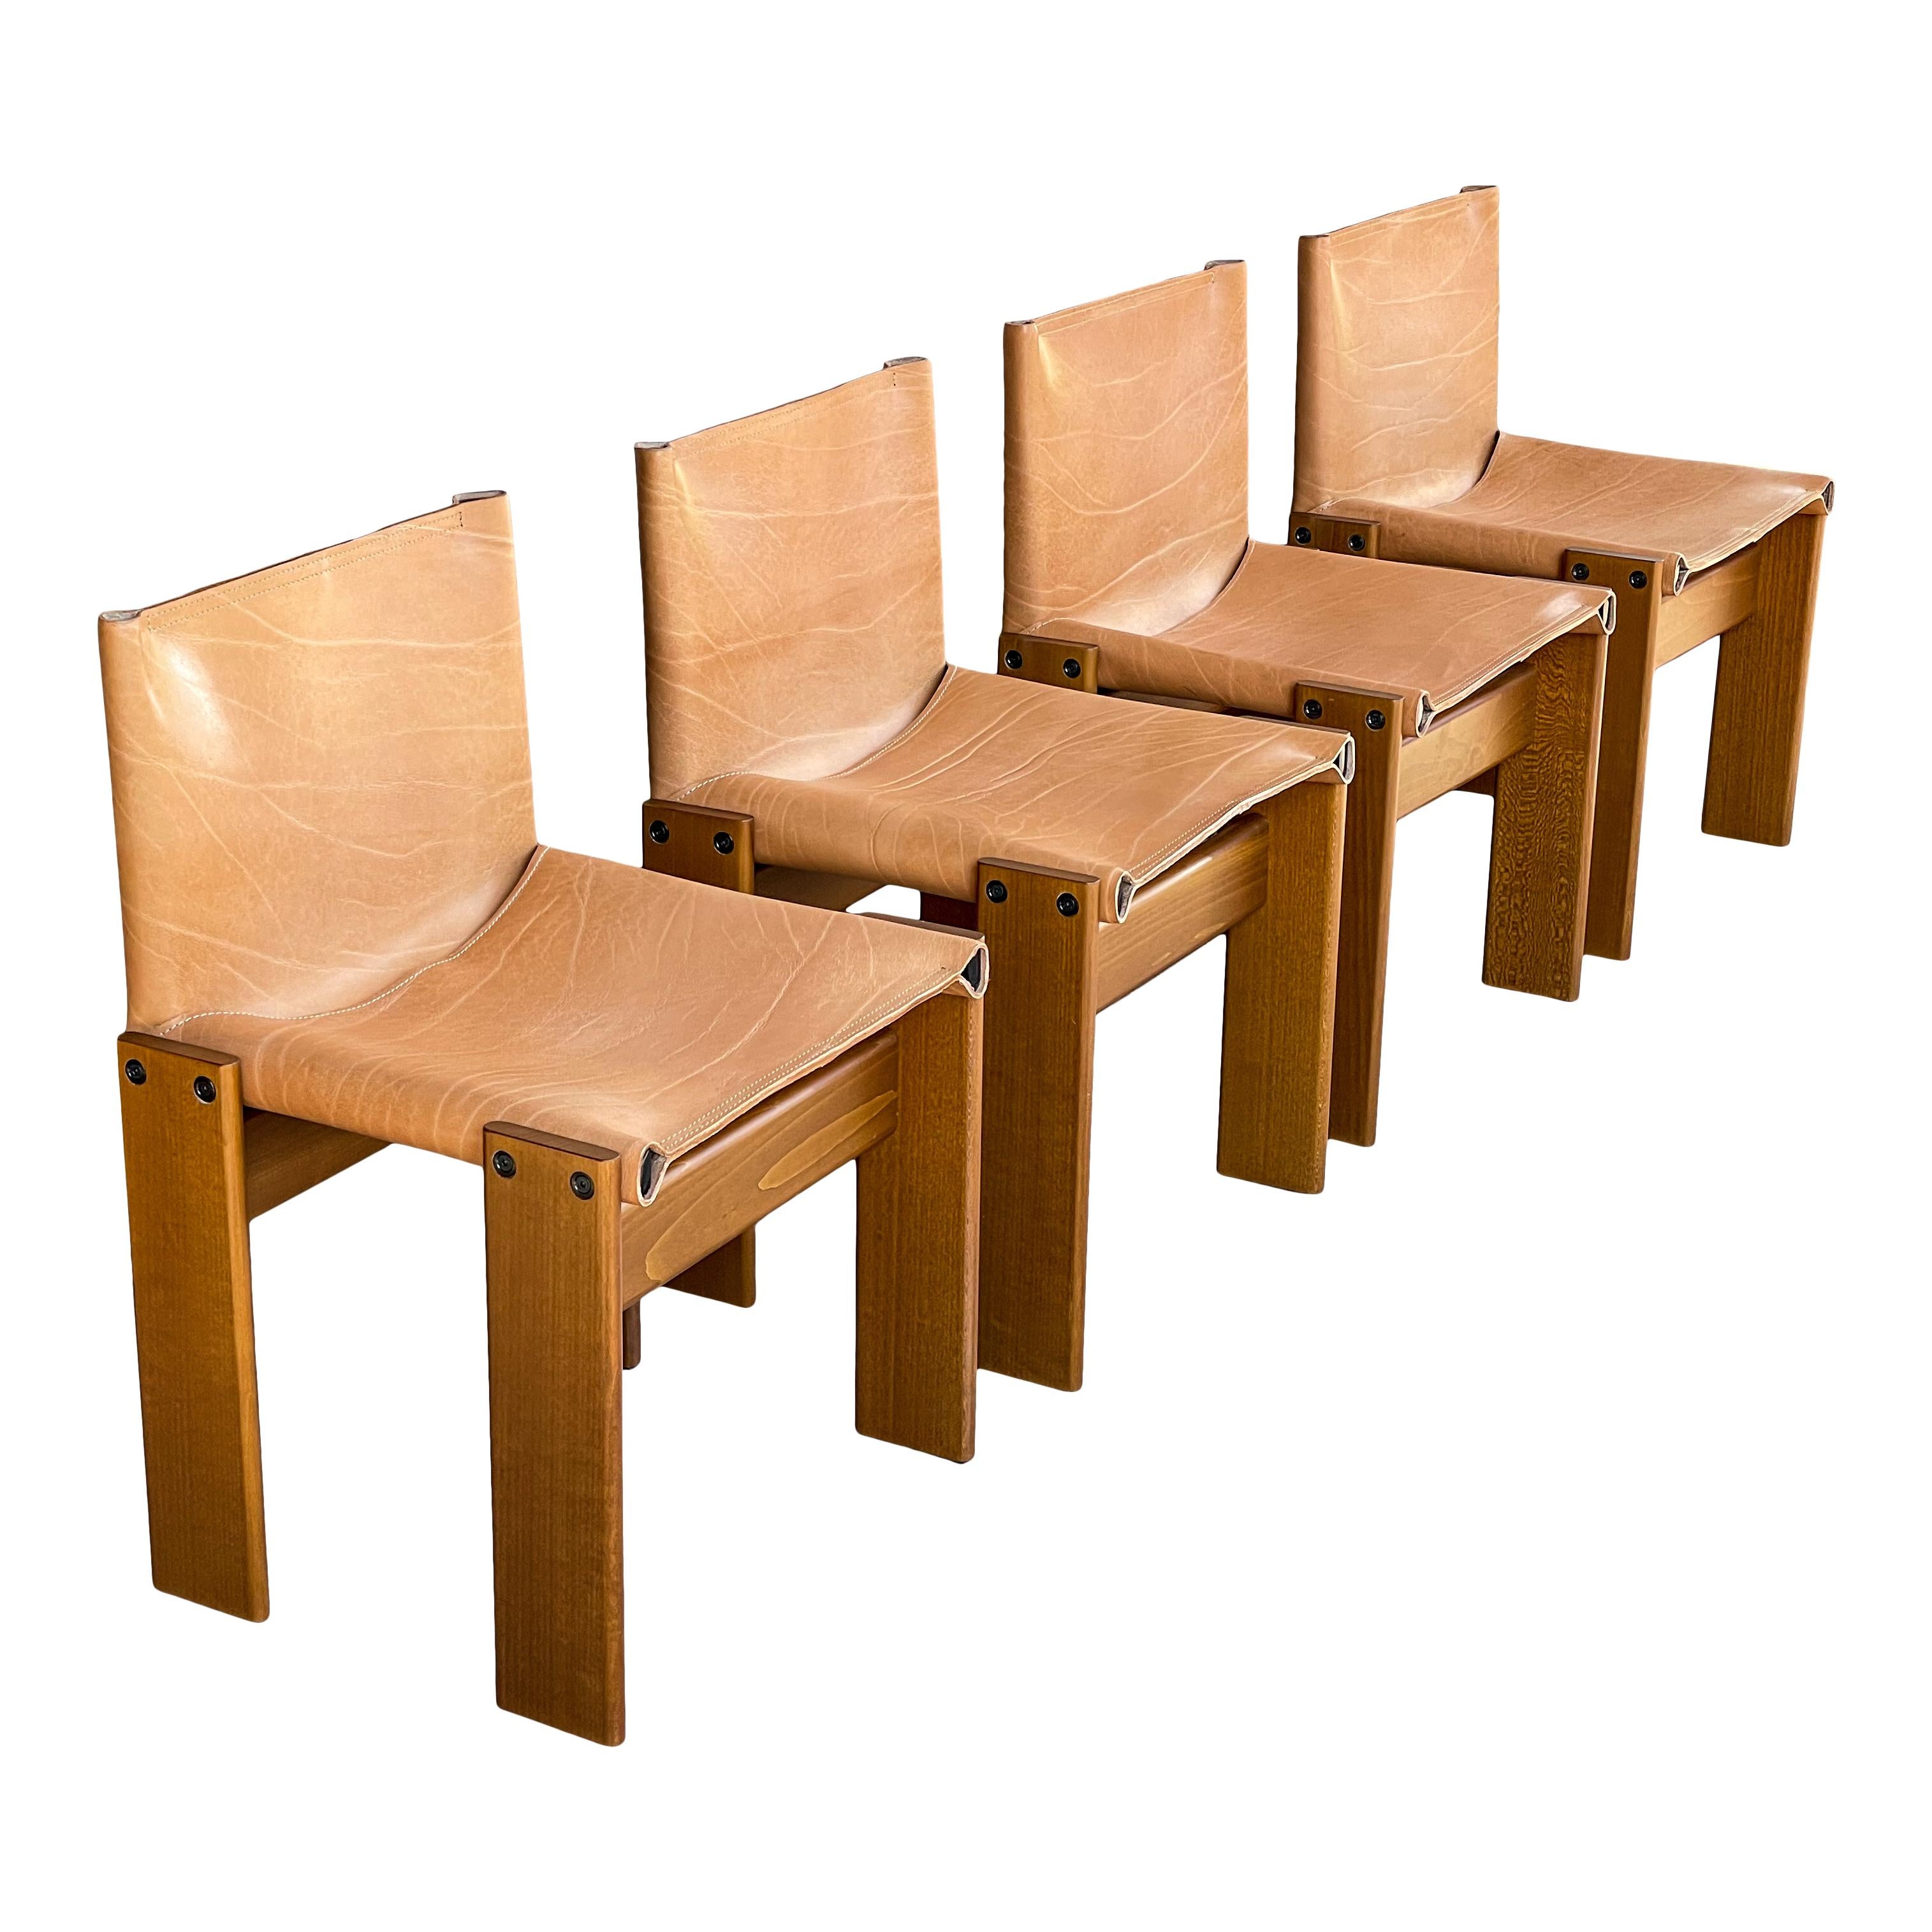 Italian Afra & Tobia Scarpa Cognac Leather Monk Dining Chair for Molteni, 1973, Set of 4 For Sale